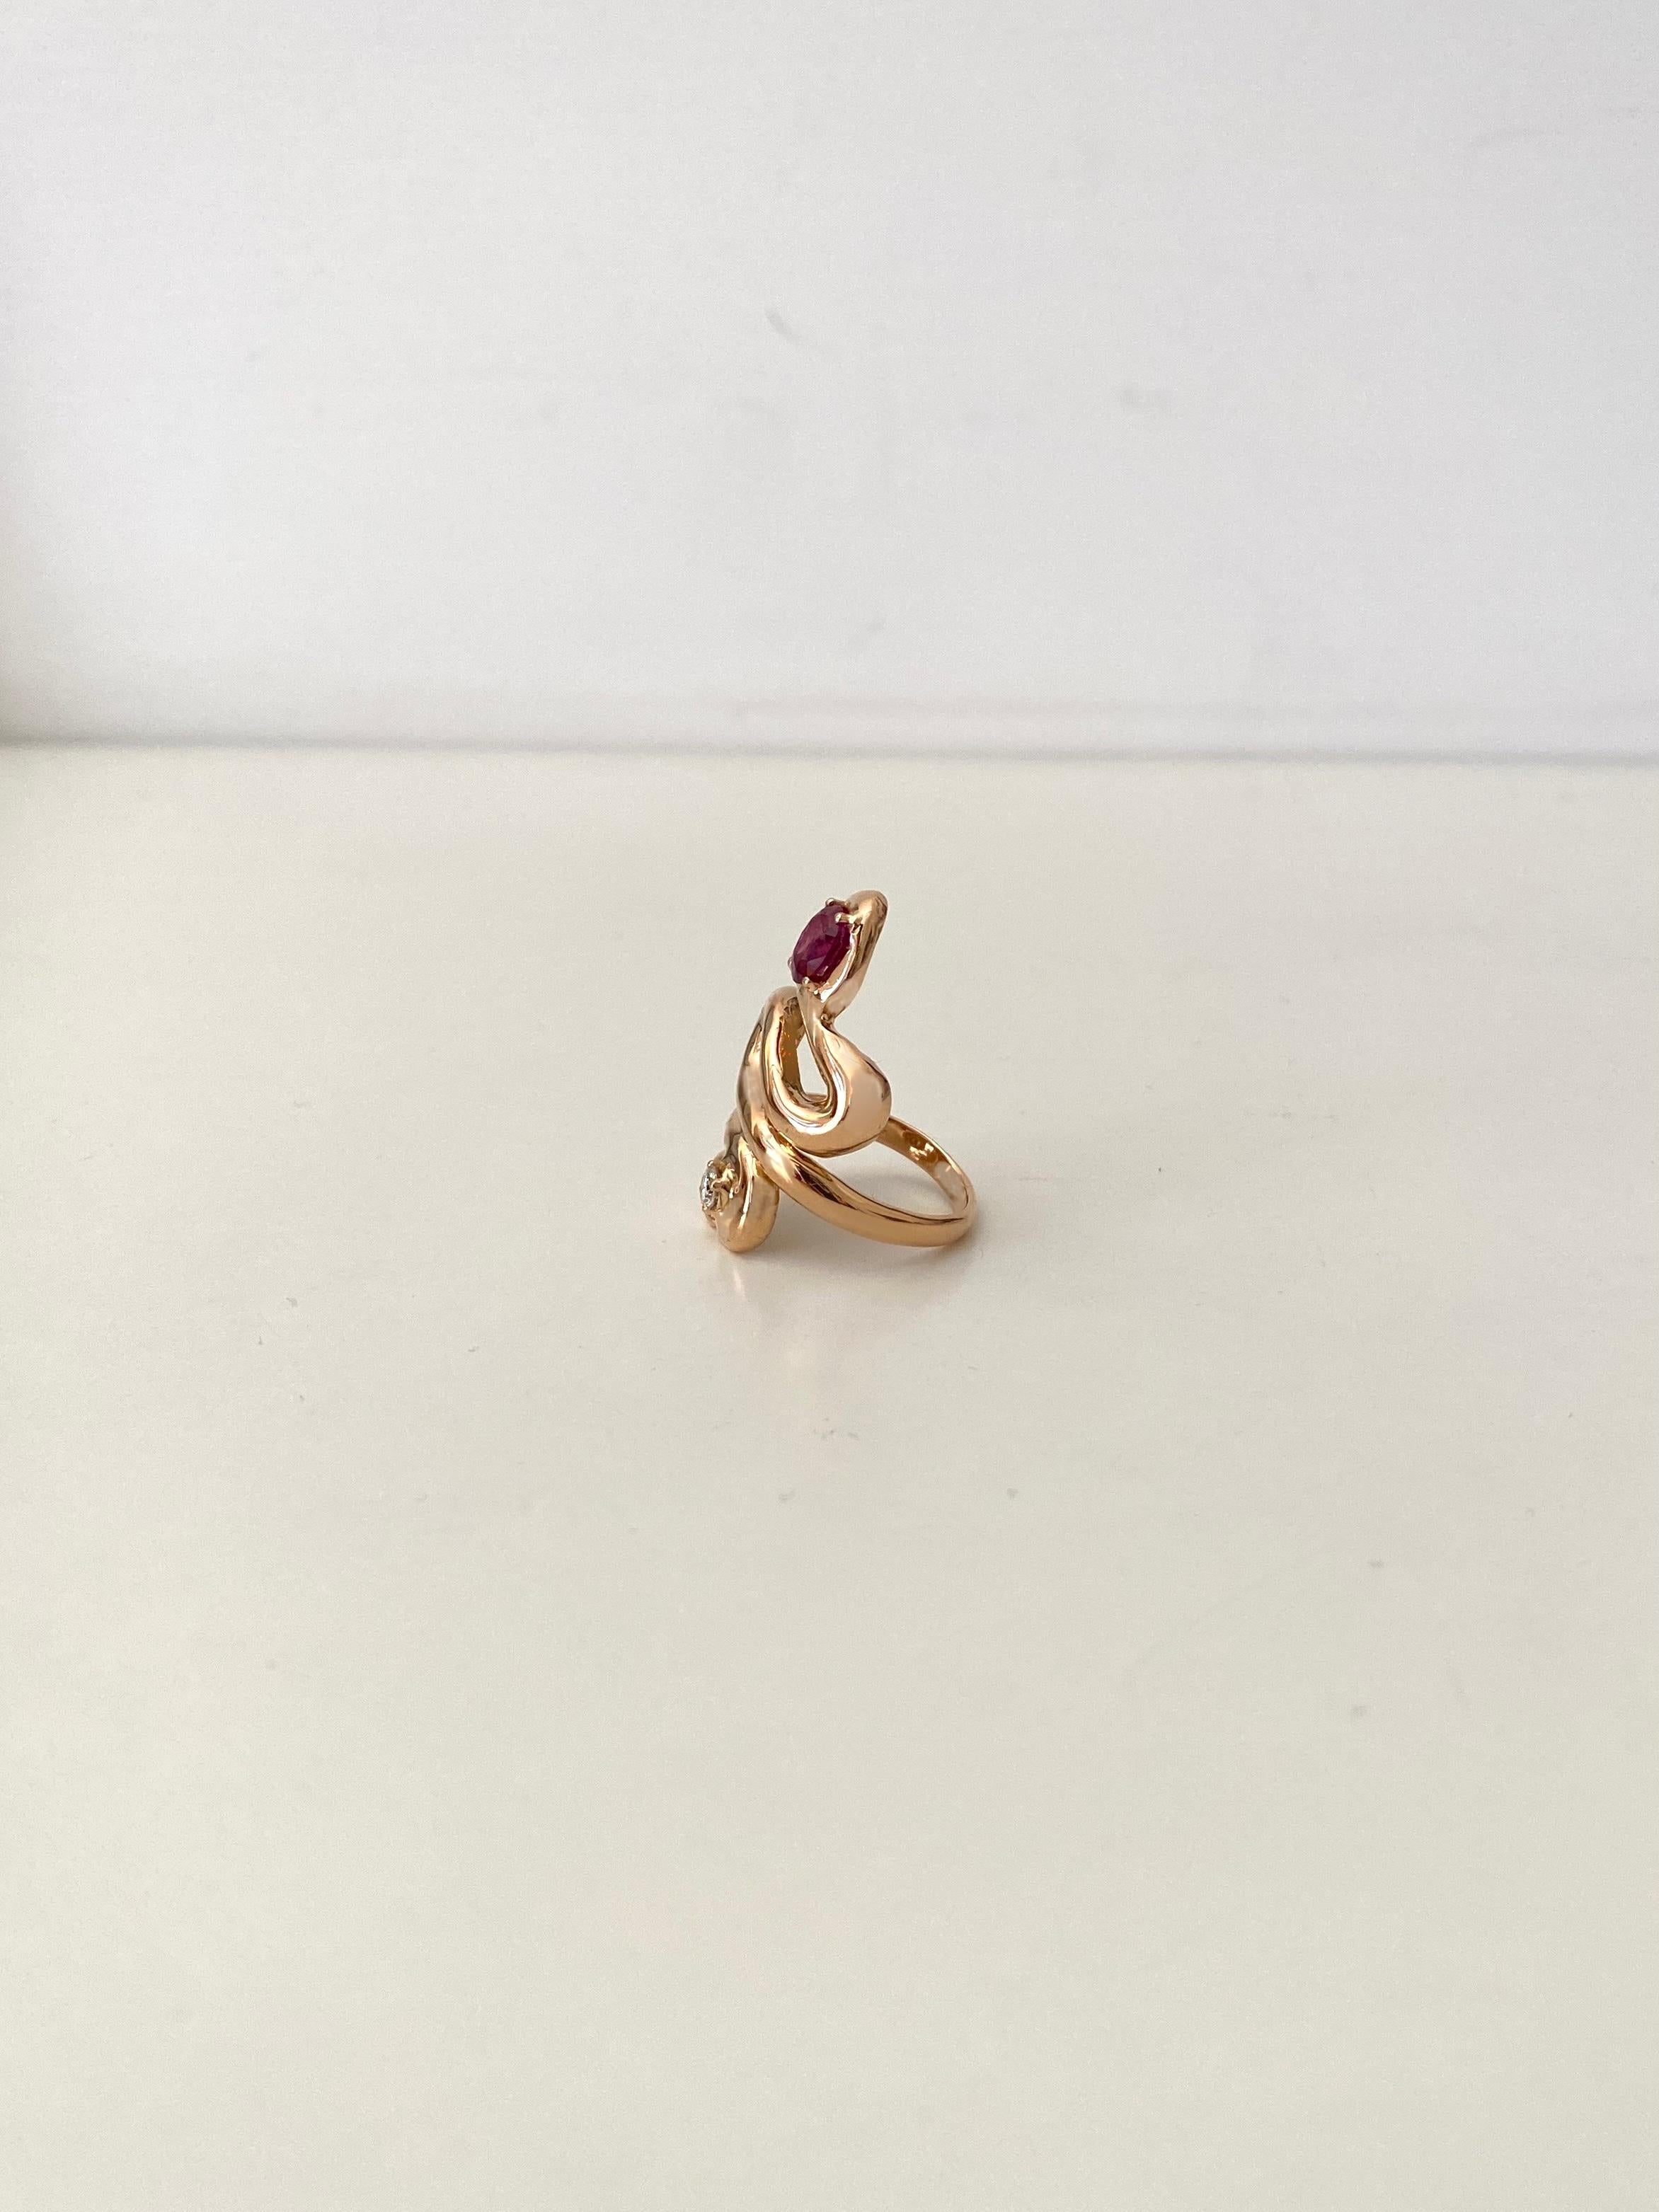 18K Yellow Gold Snake Bold Unisex Ring with Ruby Diamond Rossella Ugolini Design For Sale 4